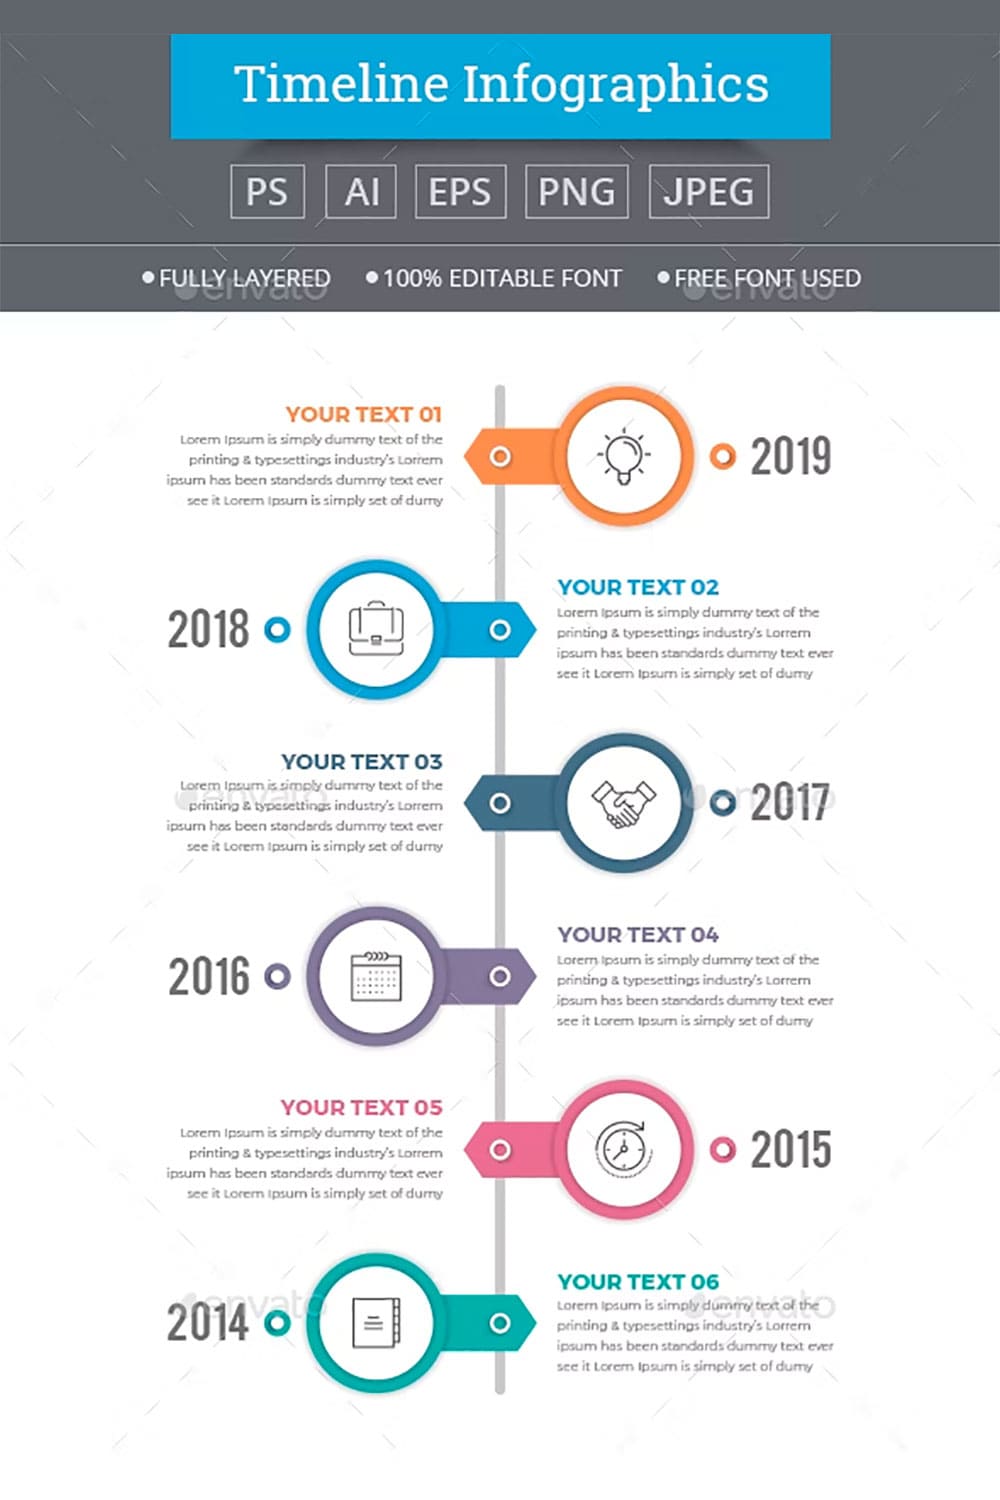 Modern timeline infographics, picture for pinterest.